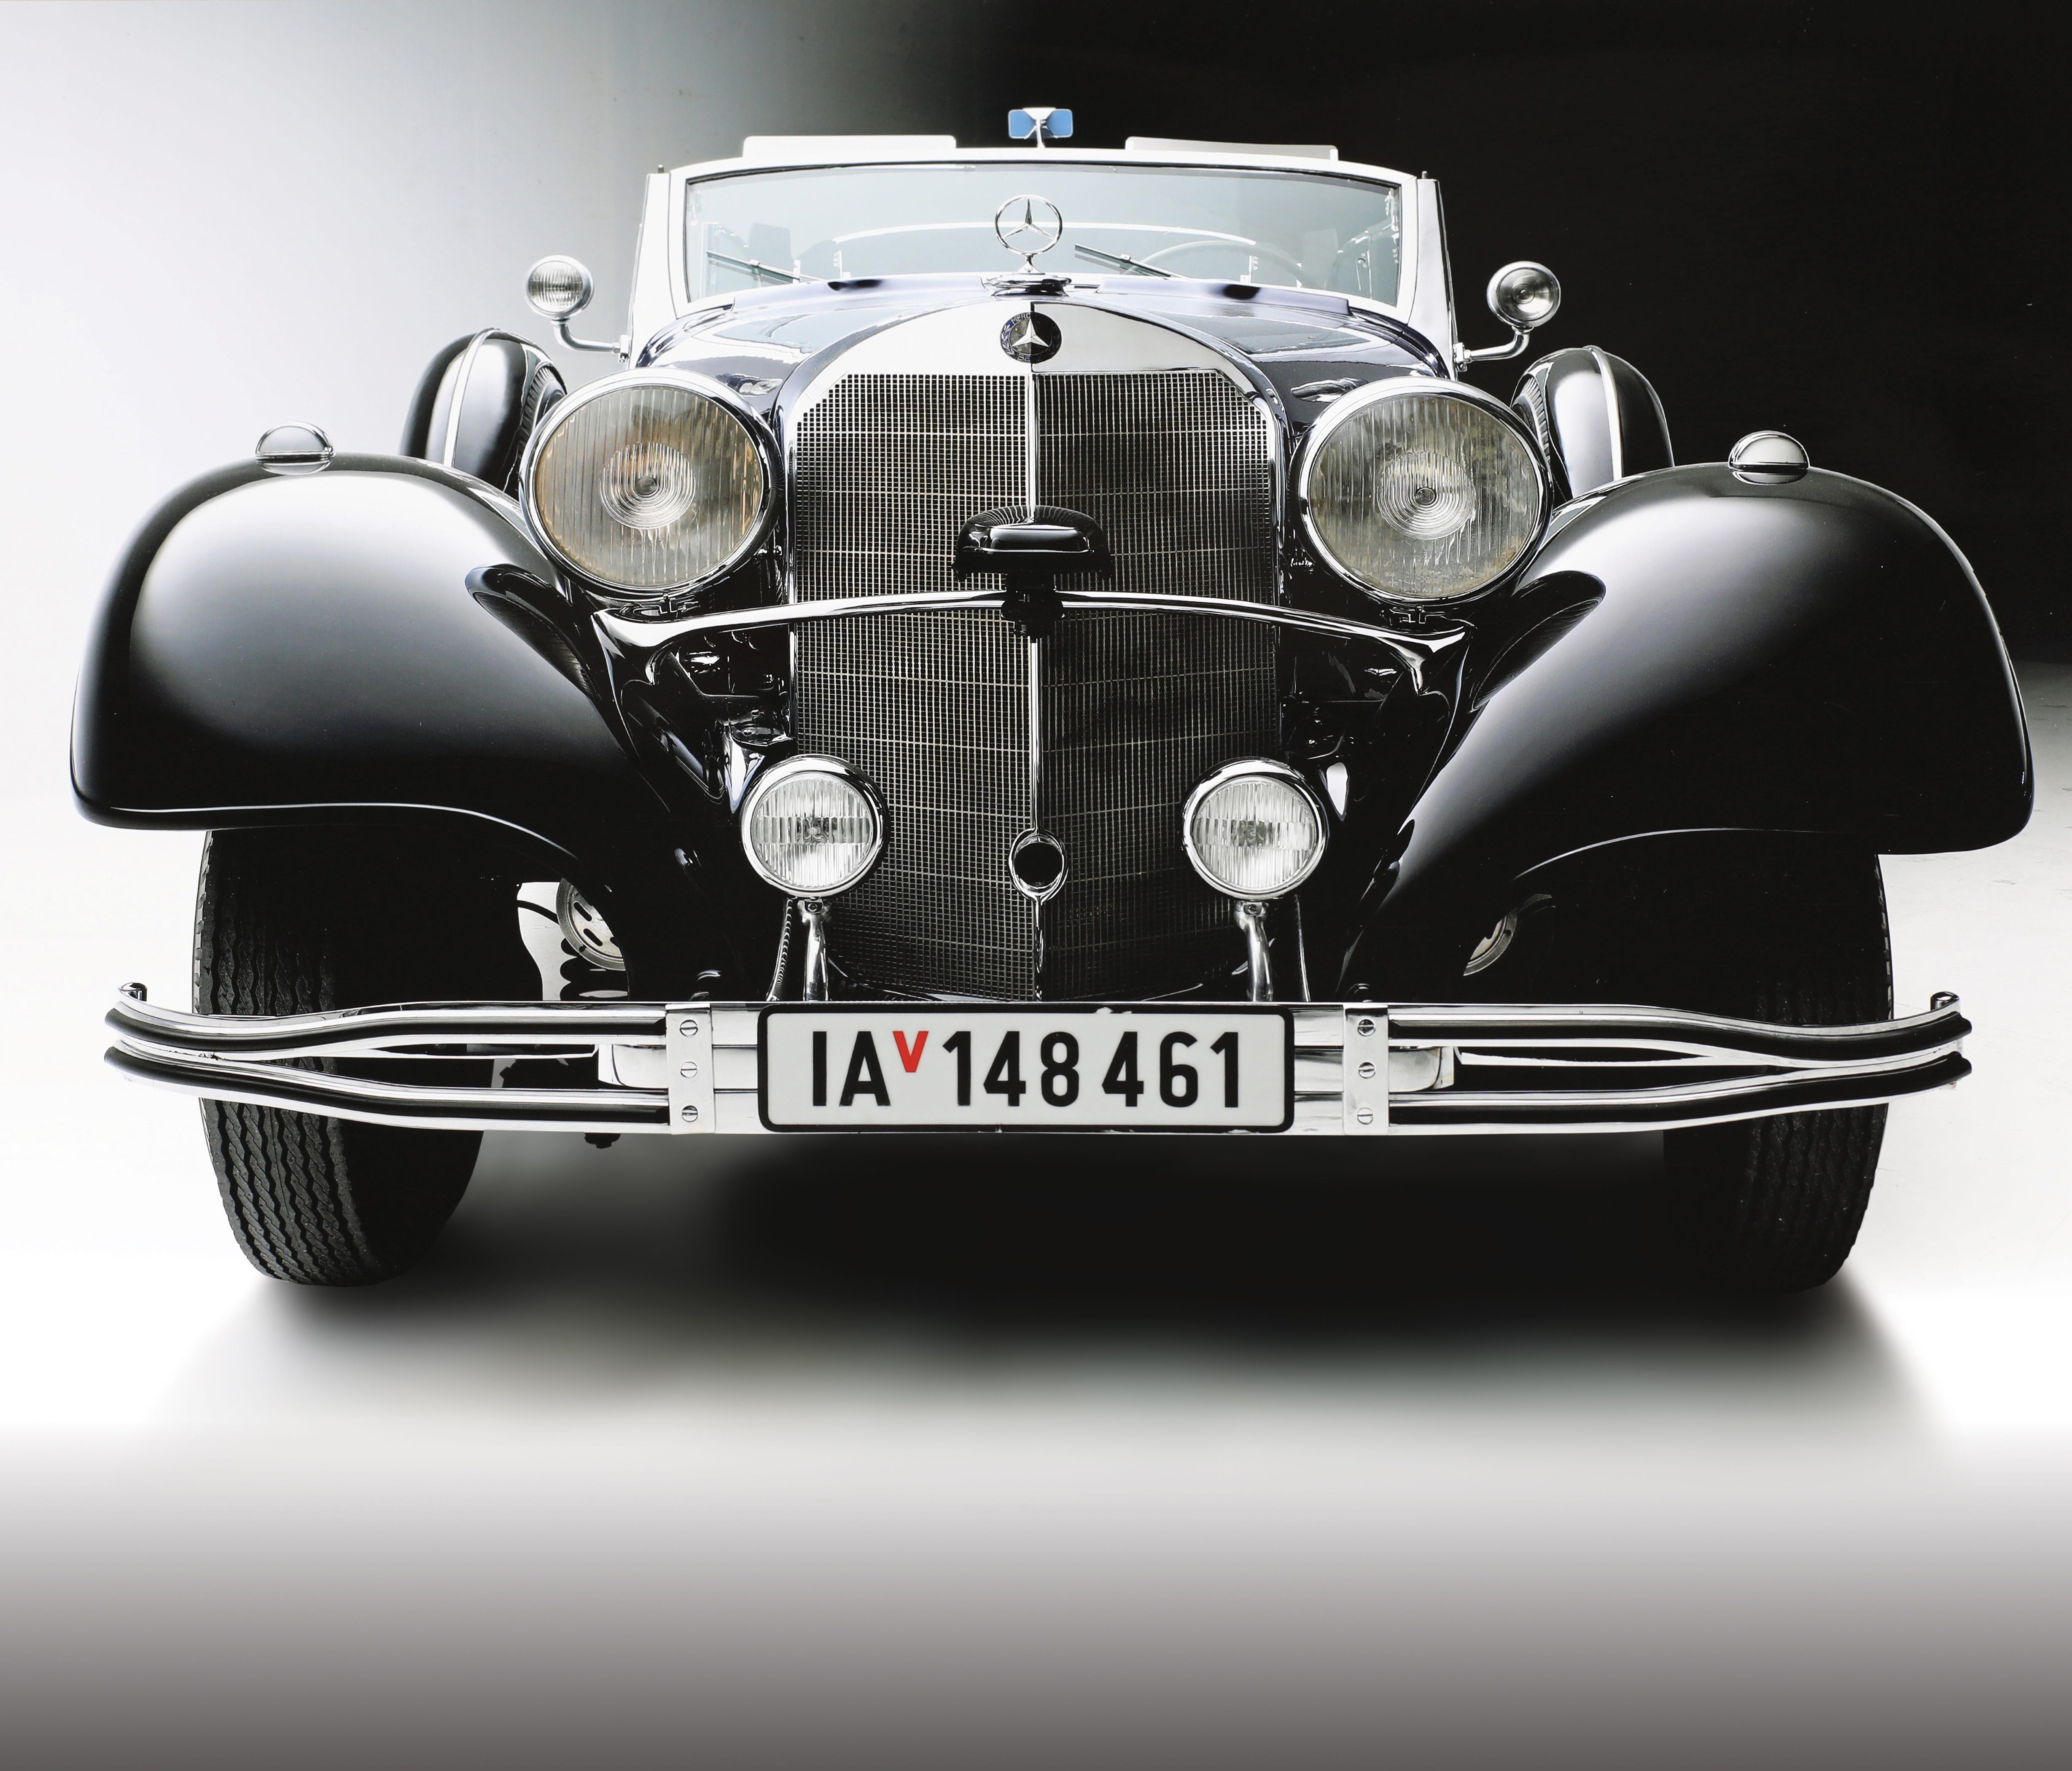 Mercedes-Benz that carried Adolf Hitler during parades in Nazi Germany will be up for auction in Scottsdale.